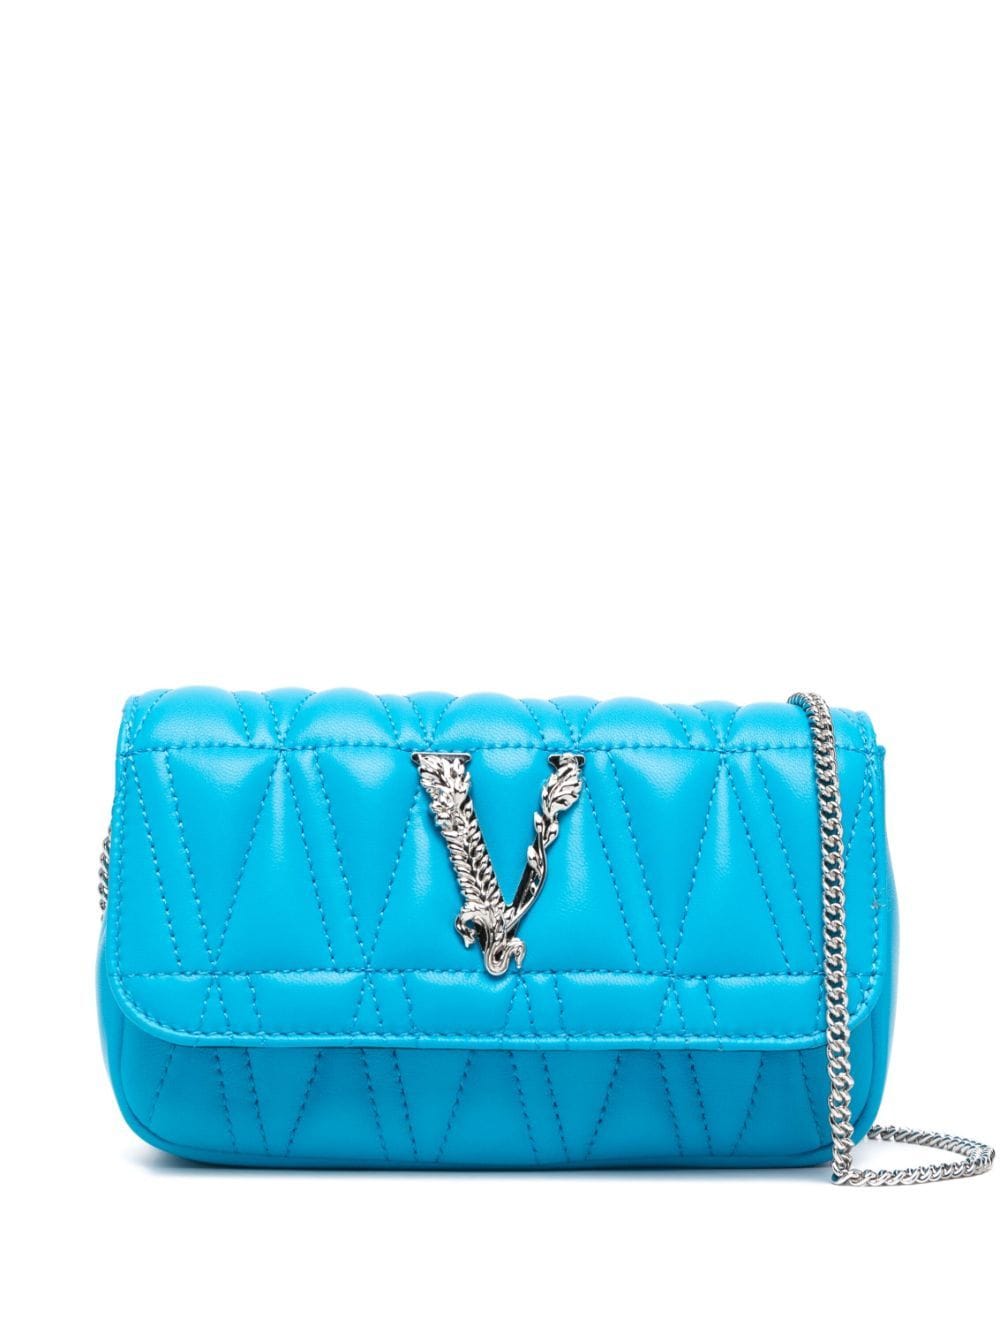 Versace Virtus Quilted Leather Mini Bag - Farfetch